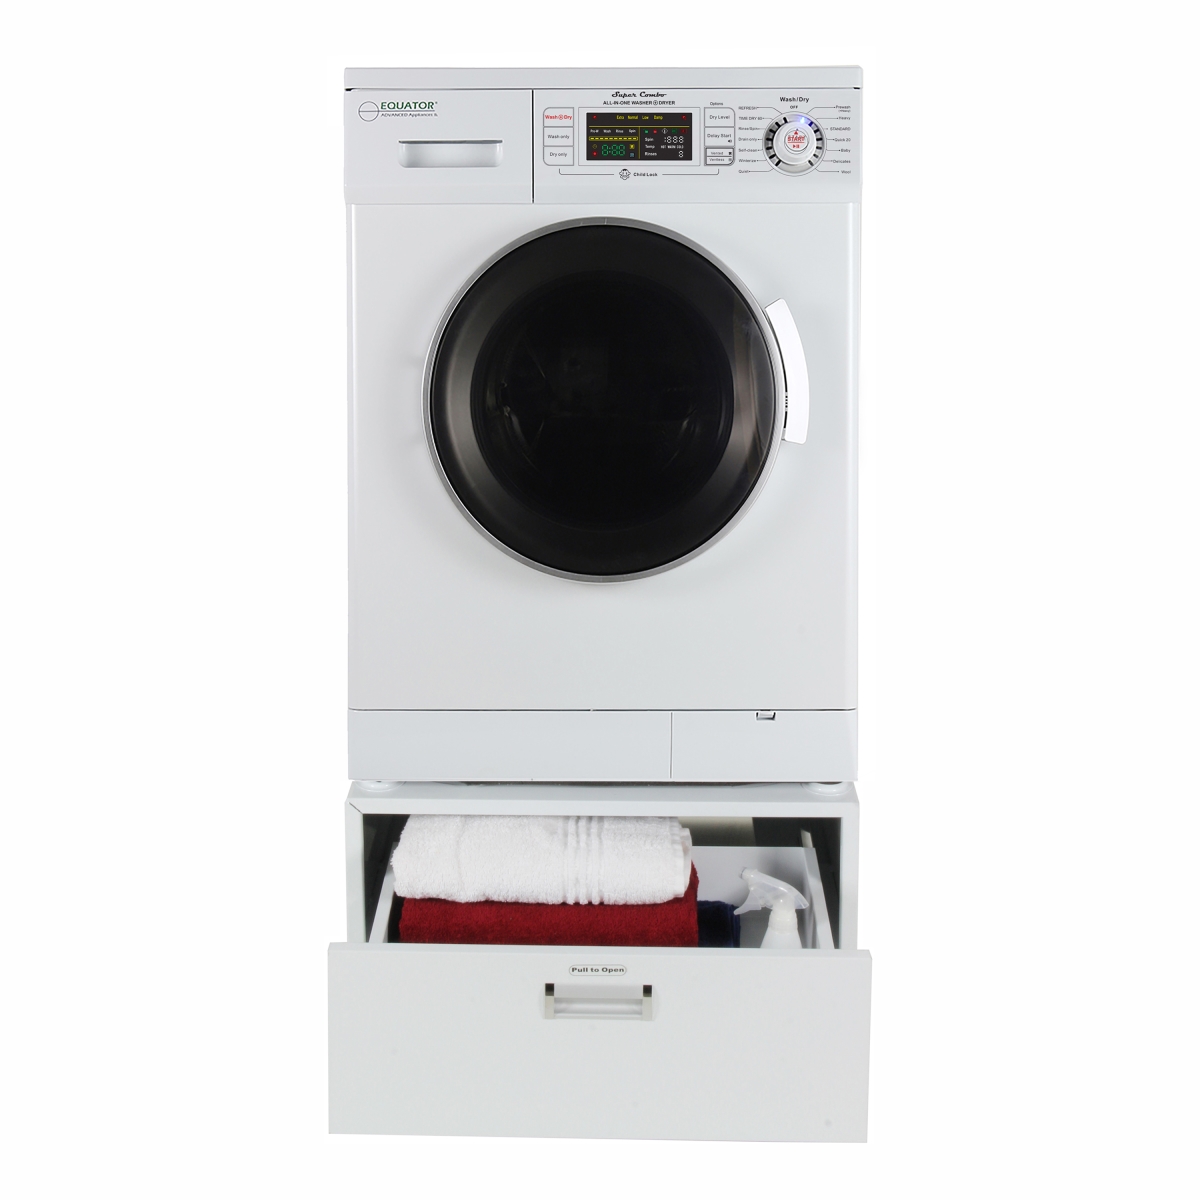 Ez4400n-pdl2830w Compact 13 Lbs Combination Washer Dryer With Pedestal, White - 2019 Model